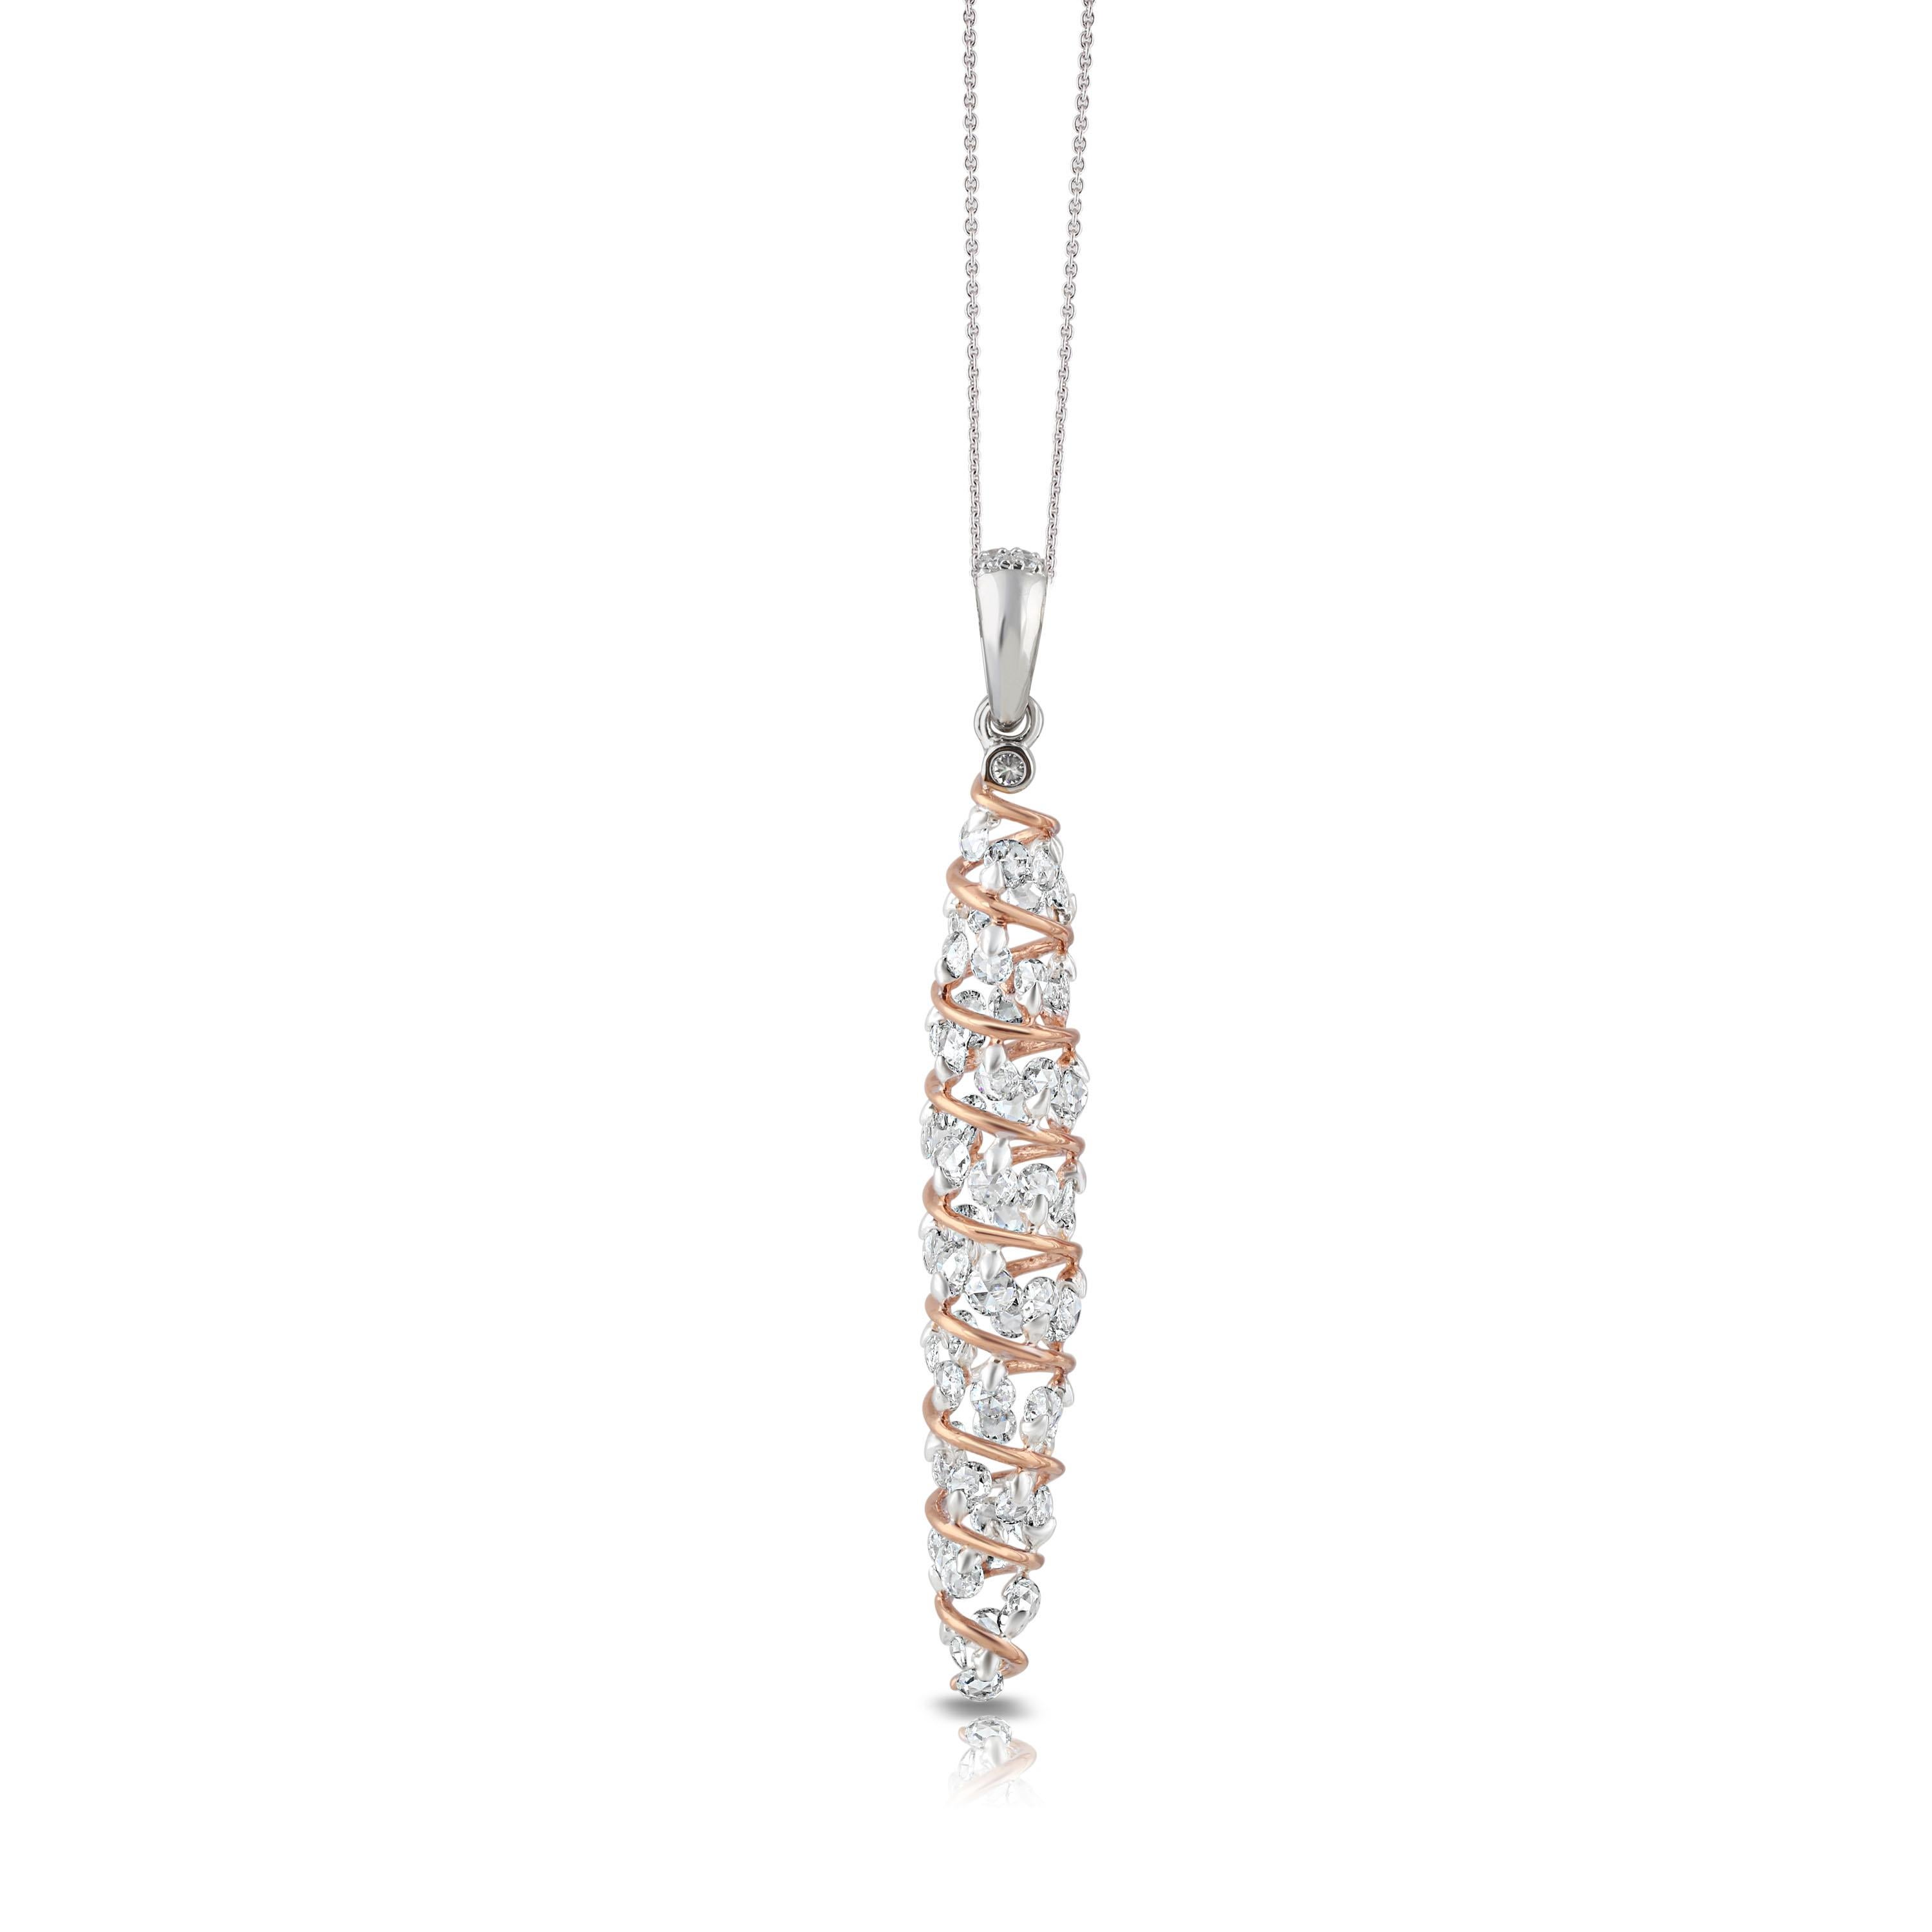 Studio Rêves Rose Cut Diamonds Spiral Pendant in 18 Karat White and Rose Gold In New Condition For Sale In Mumbai, Maharashtra